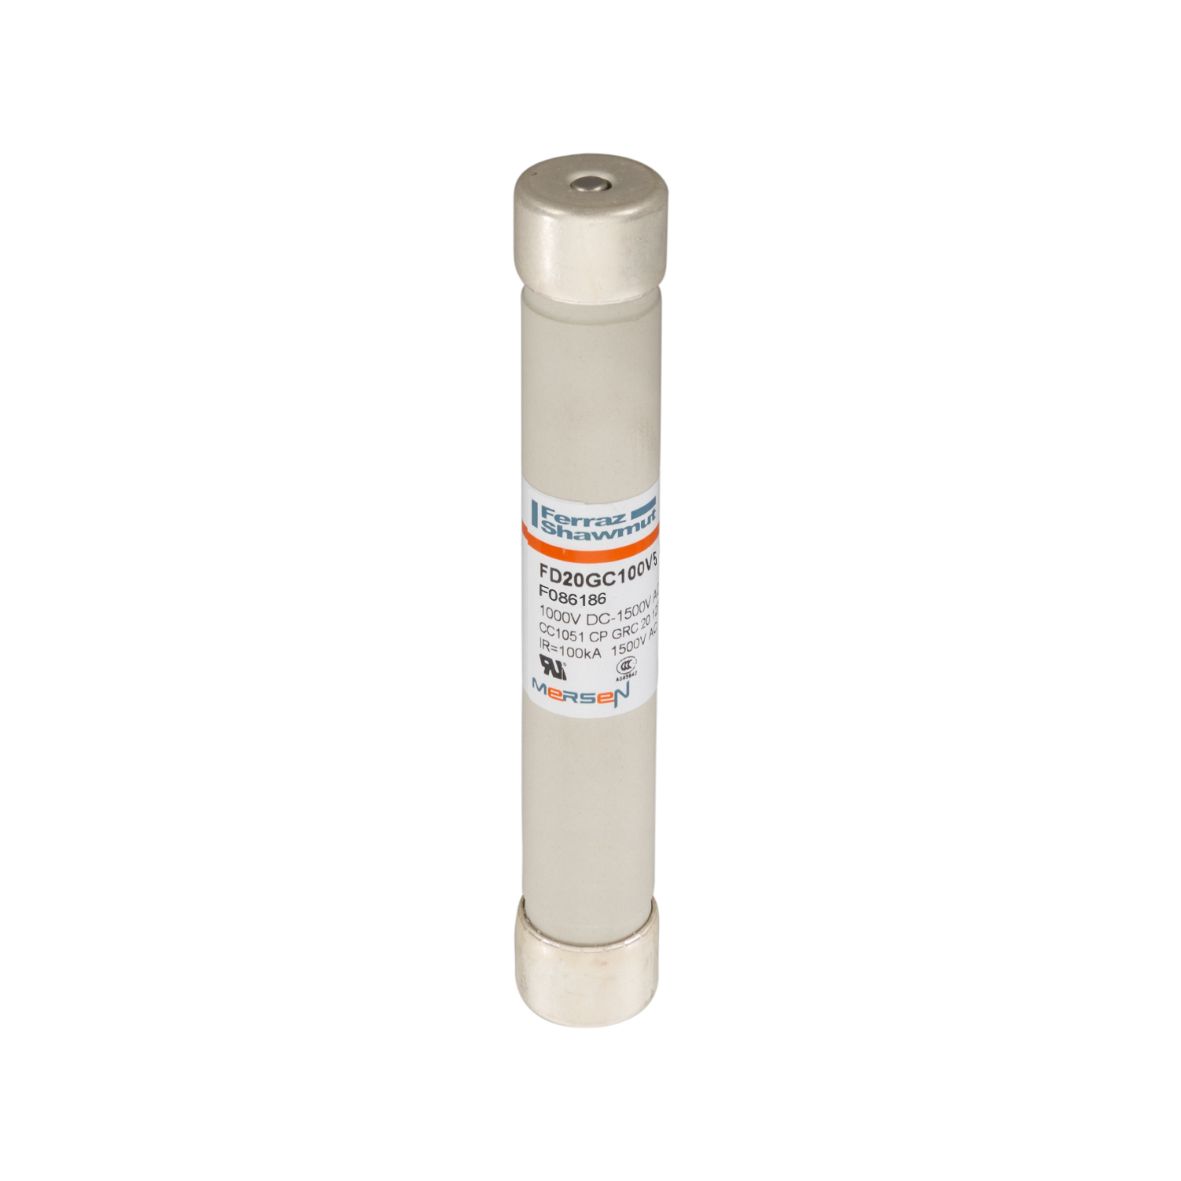 F086186 - Cylindrical fuse-link GRC 1000VDC 20x127, 50A with striker